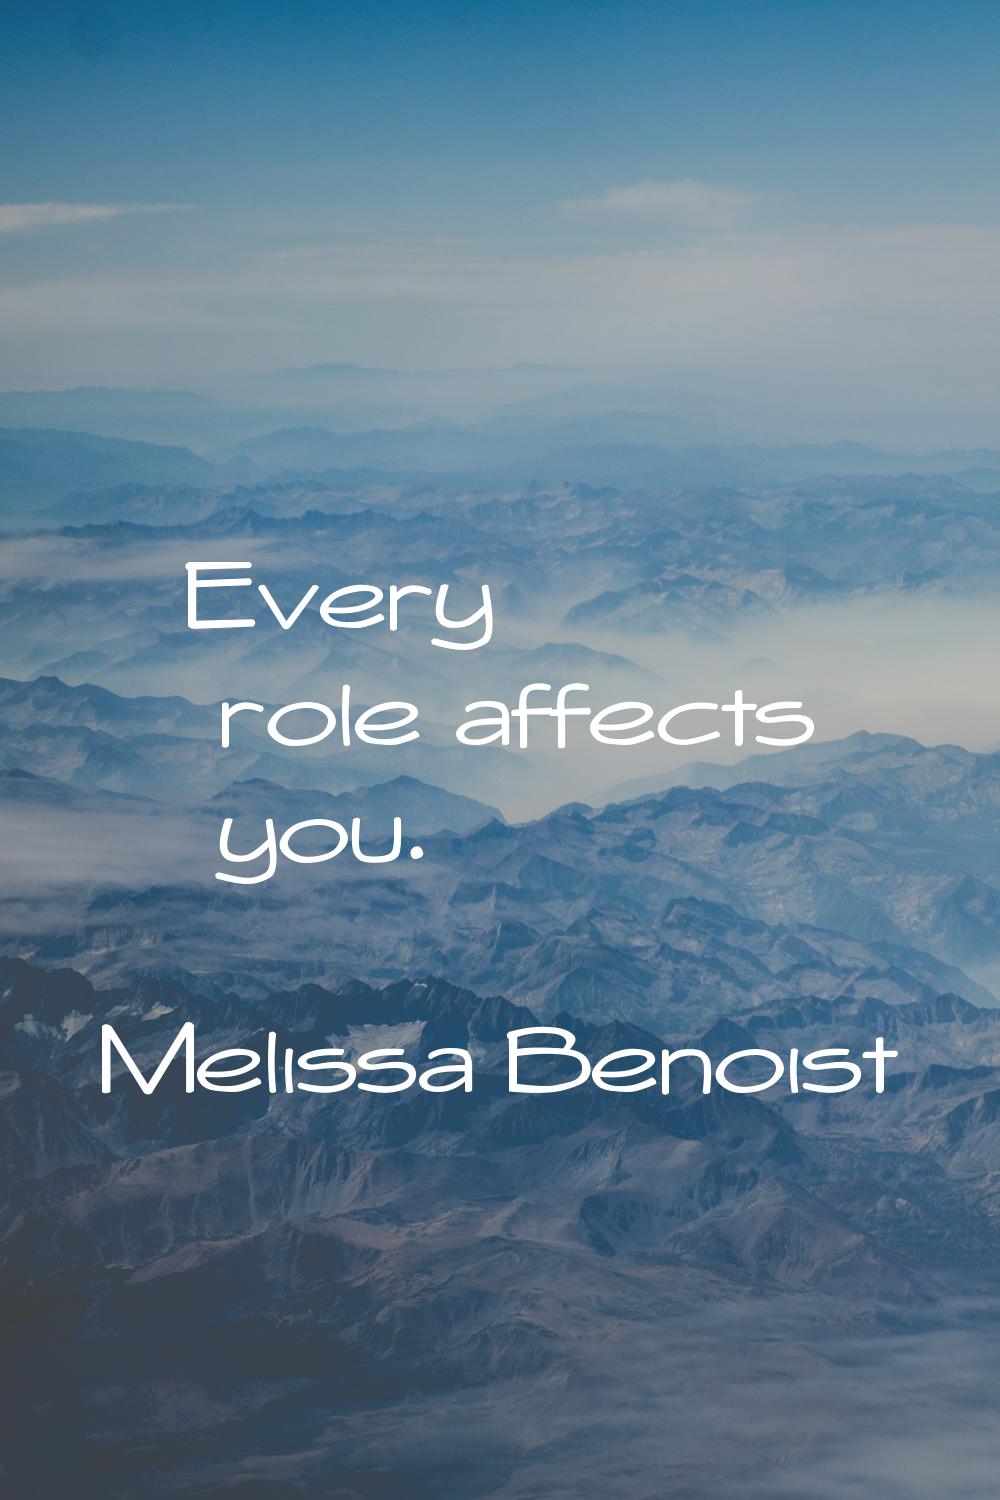 Every role affects you.